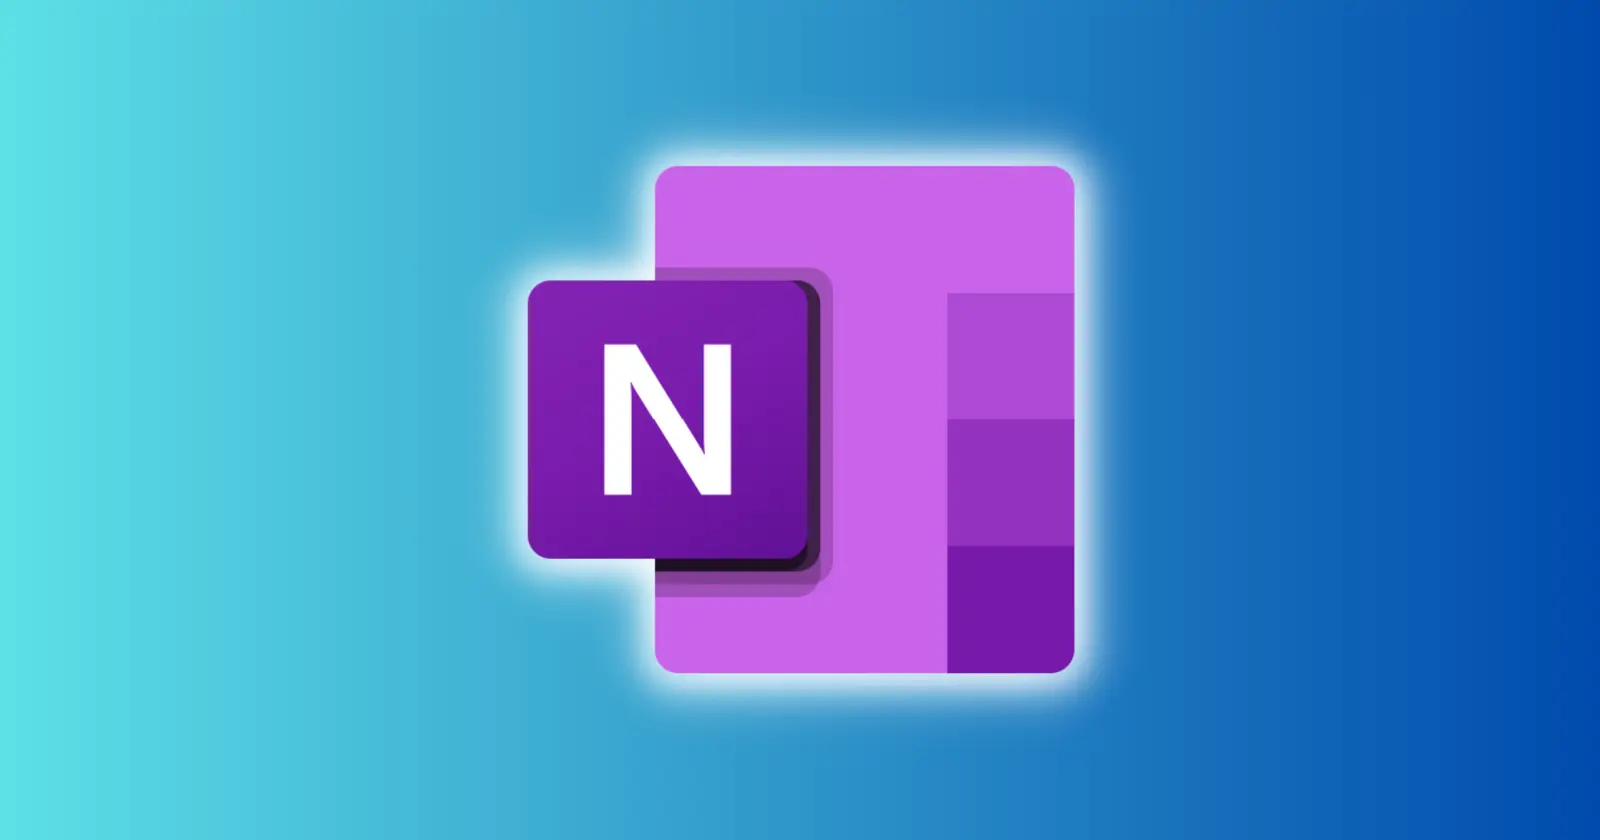 OneNote Android Gets a Fresh Look With New Features